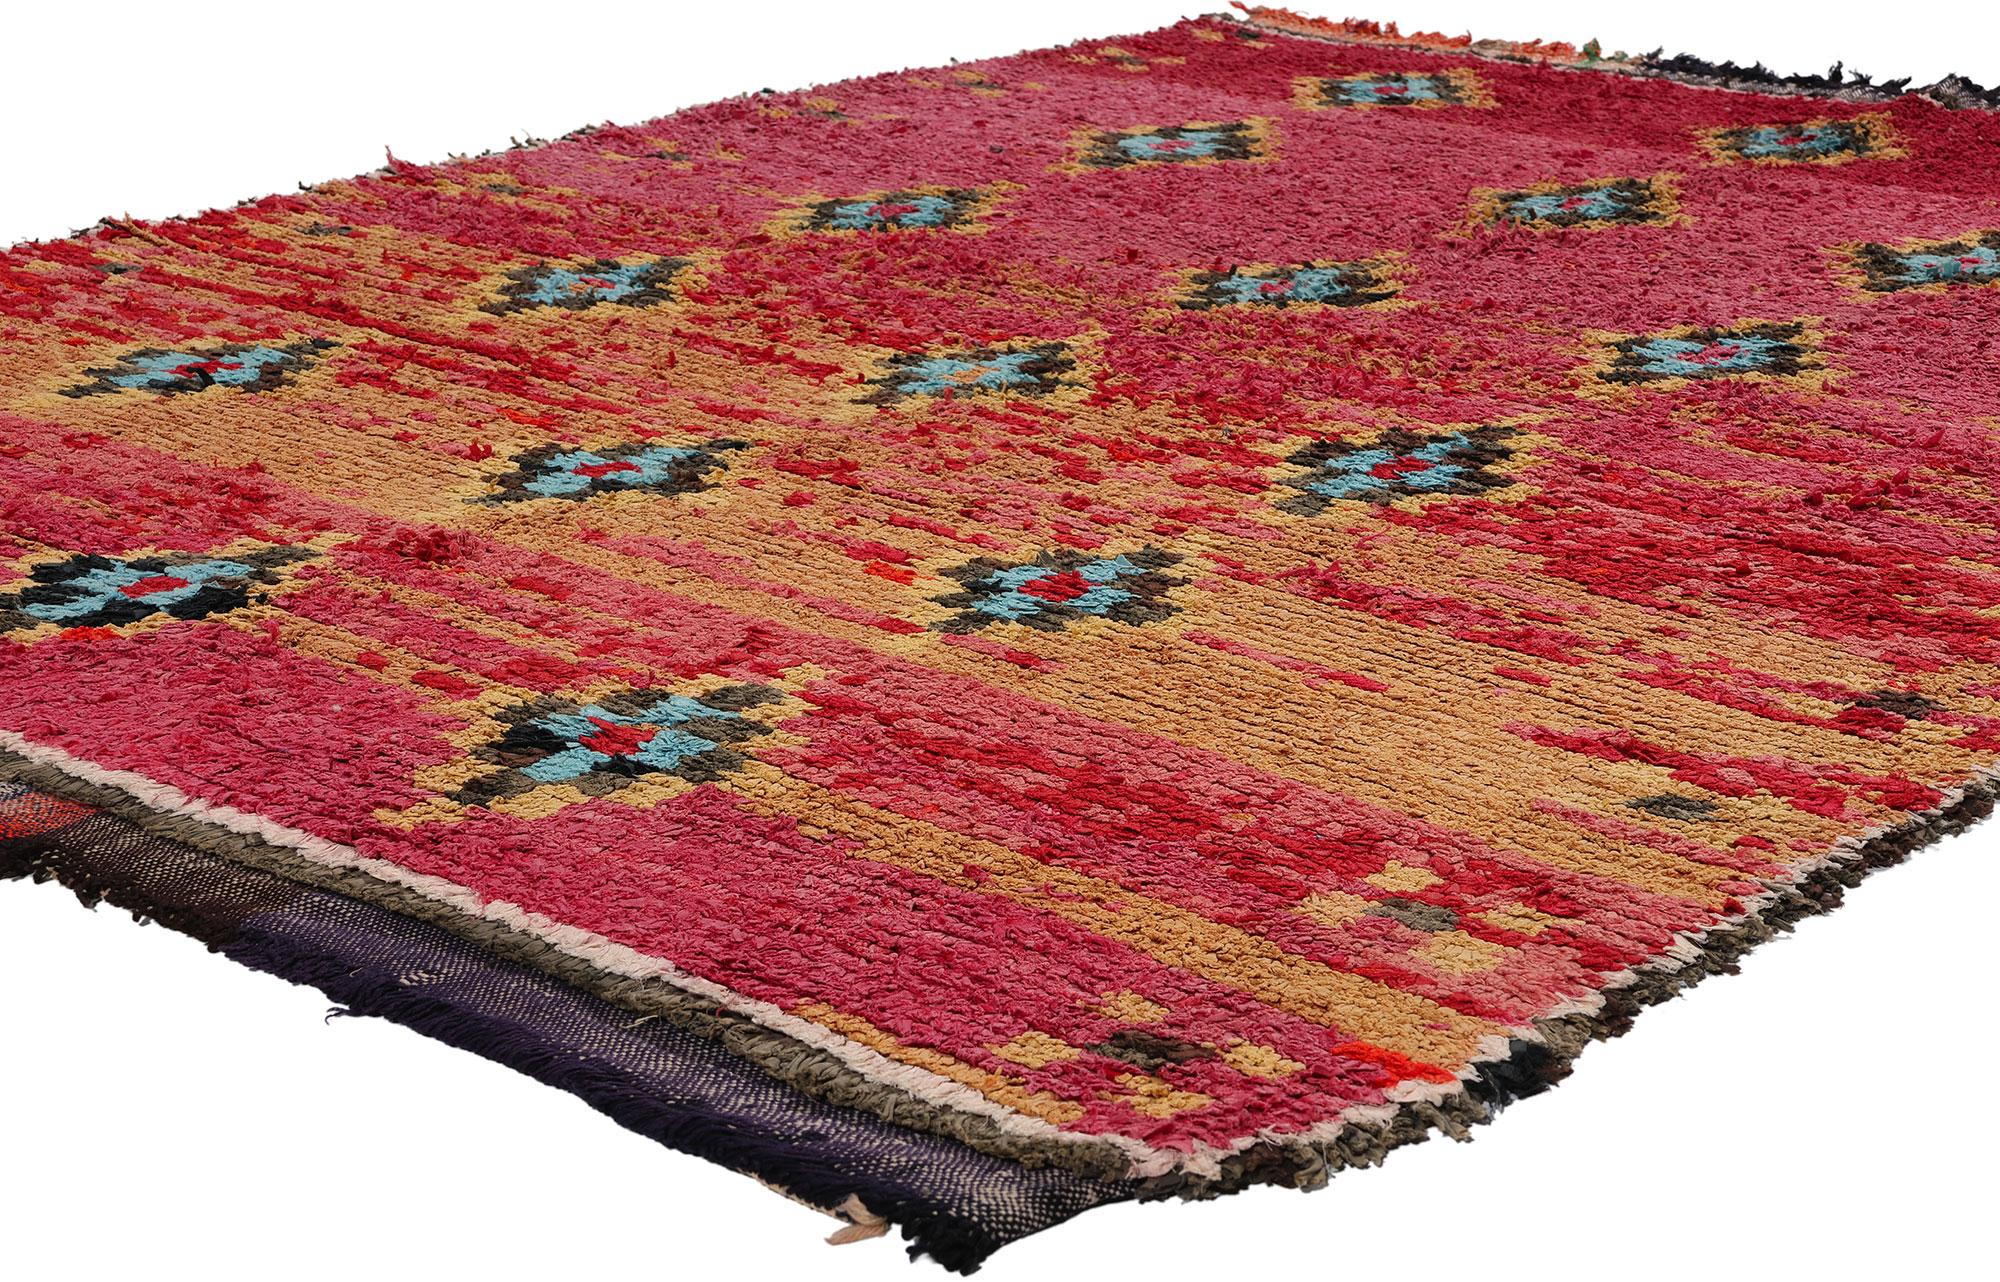 21740 Vintage Pink Moroccan Azilal Rug, 05'07 x 07'04. Enter the spirited world of Azilal rugs, where each delicate thread intricately weaves a tale spun by skilled artisans amidst the dynamic landscapes of central Morocco and the majestic High